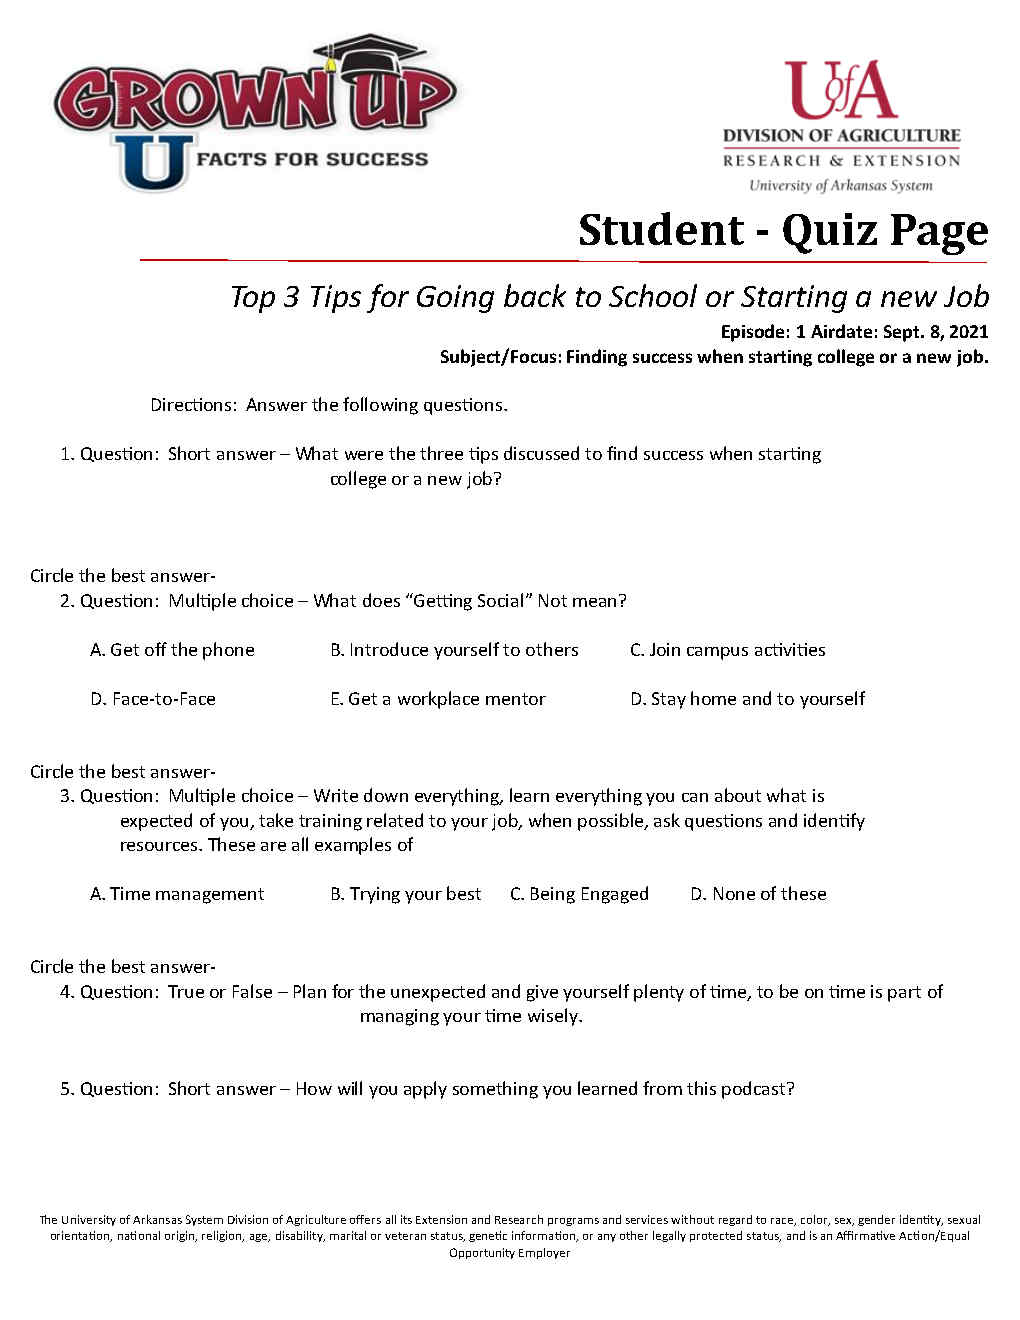 Sample picture of a student quiz available as an educator resource for the Grown Up U podcasts.